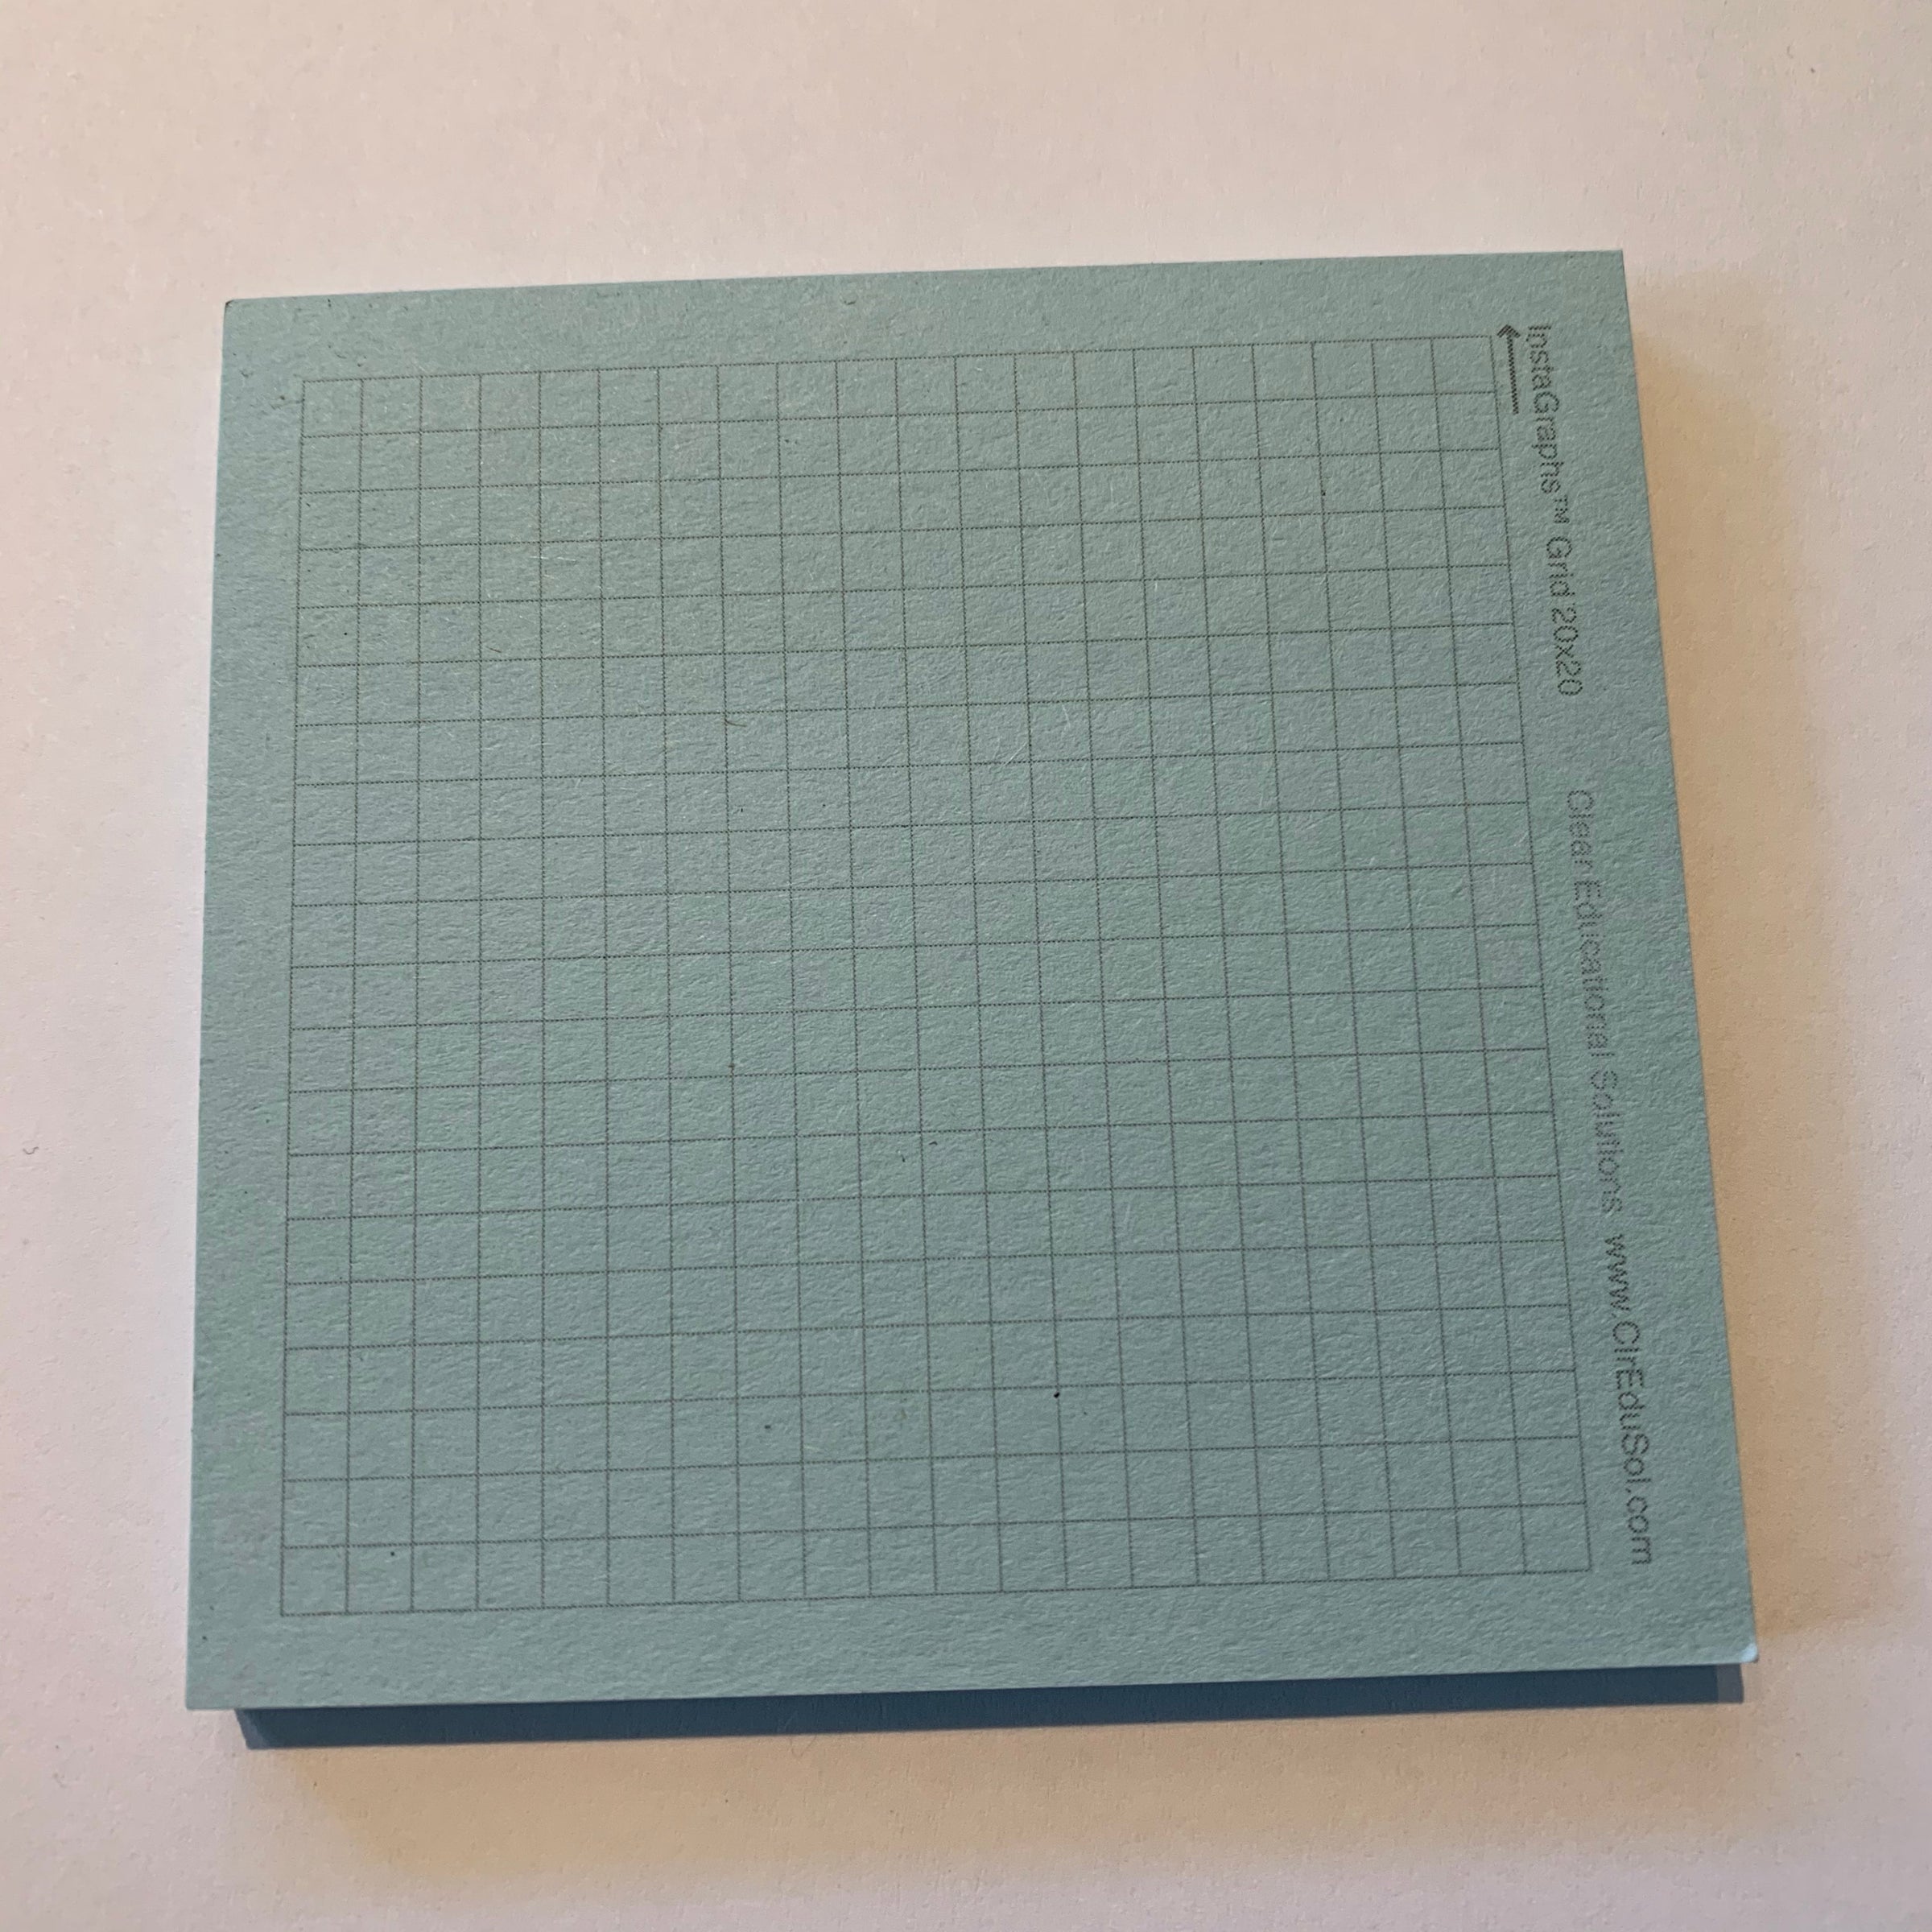 InstaGraphs adhesive grid and graph paper (sticky graphs)